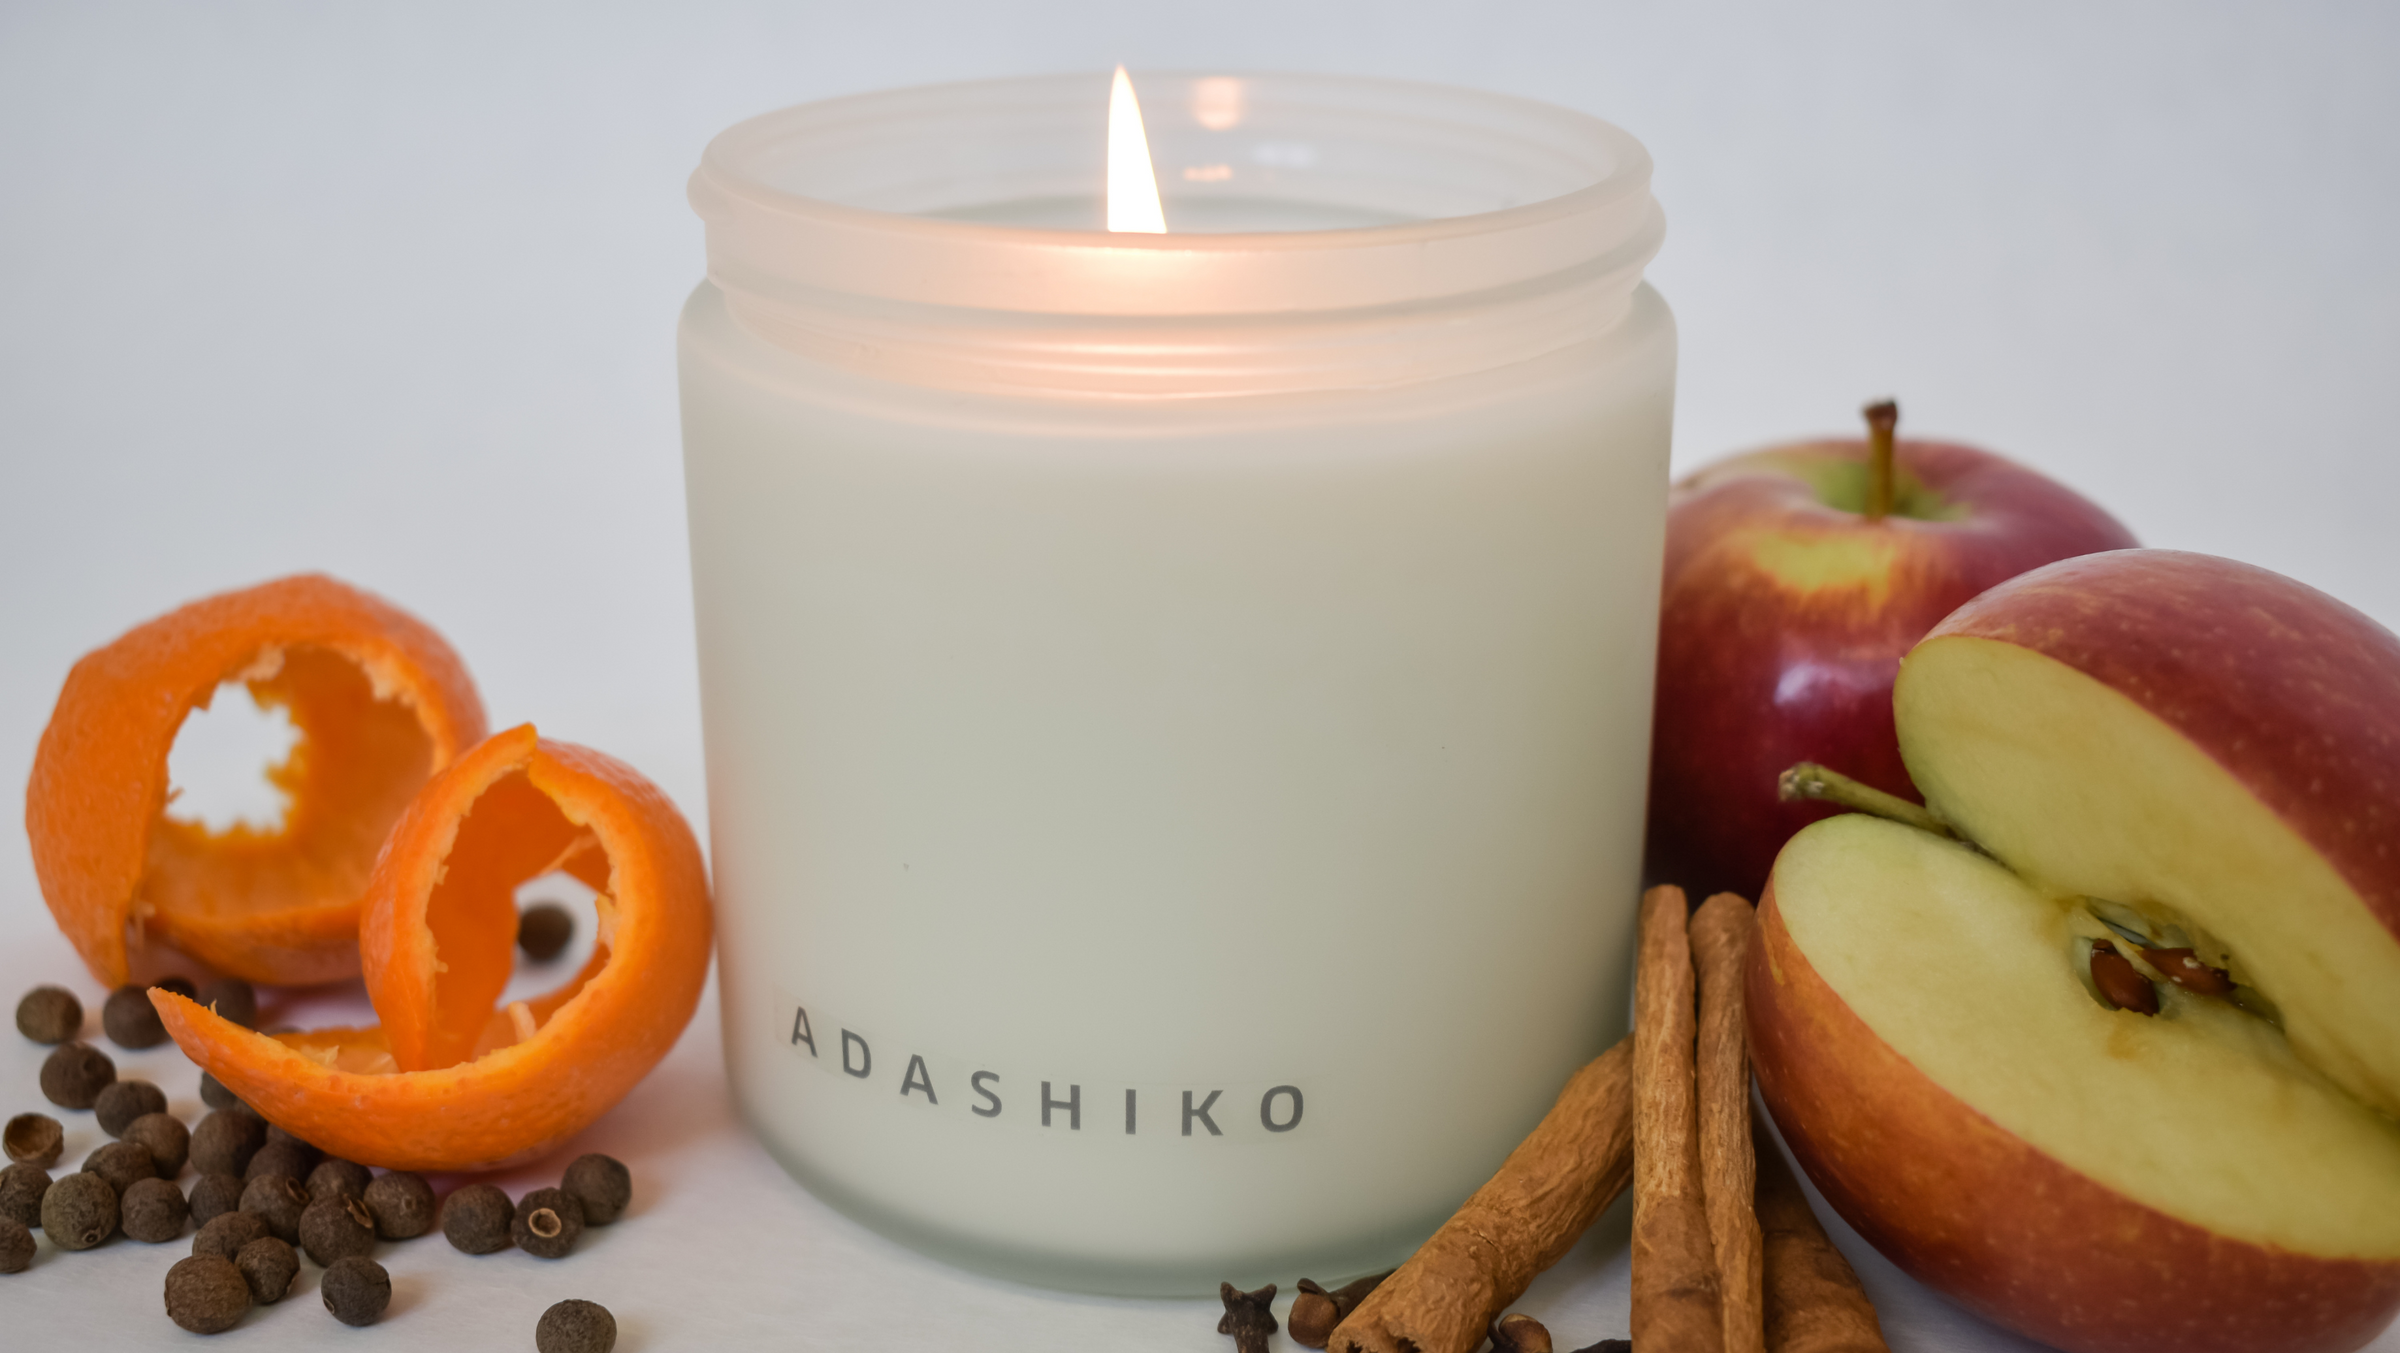 Joy Christmas Candle lit surrounded by its scent ingredients | Adashiko Collagen | 100% Natural Skincare